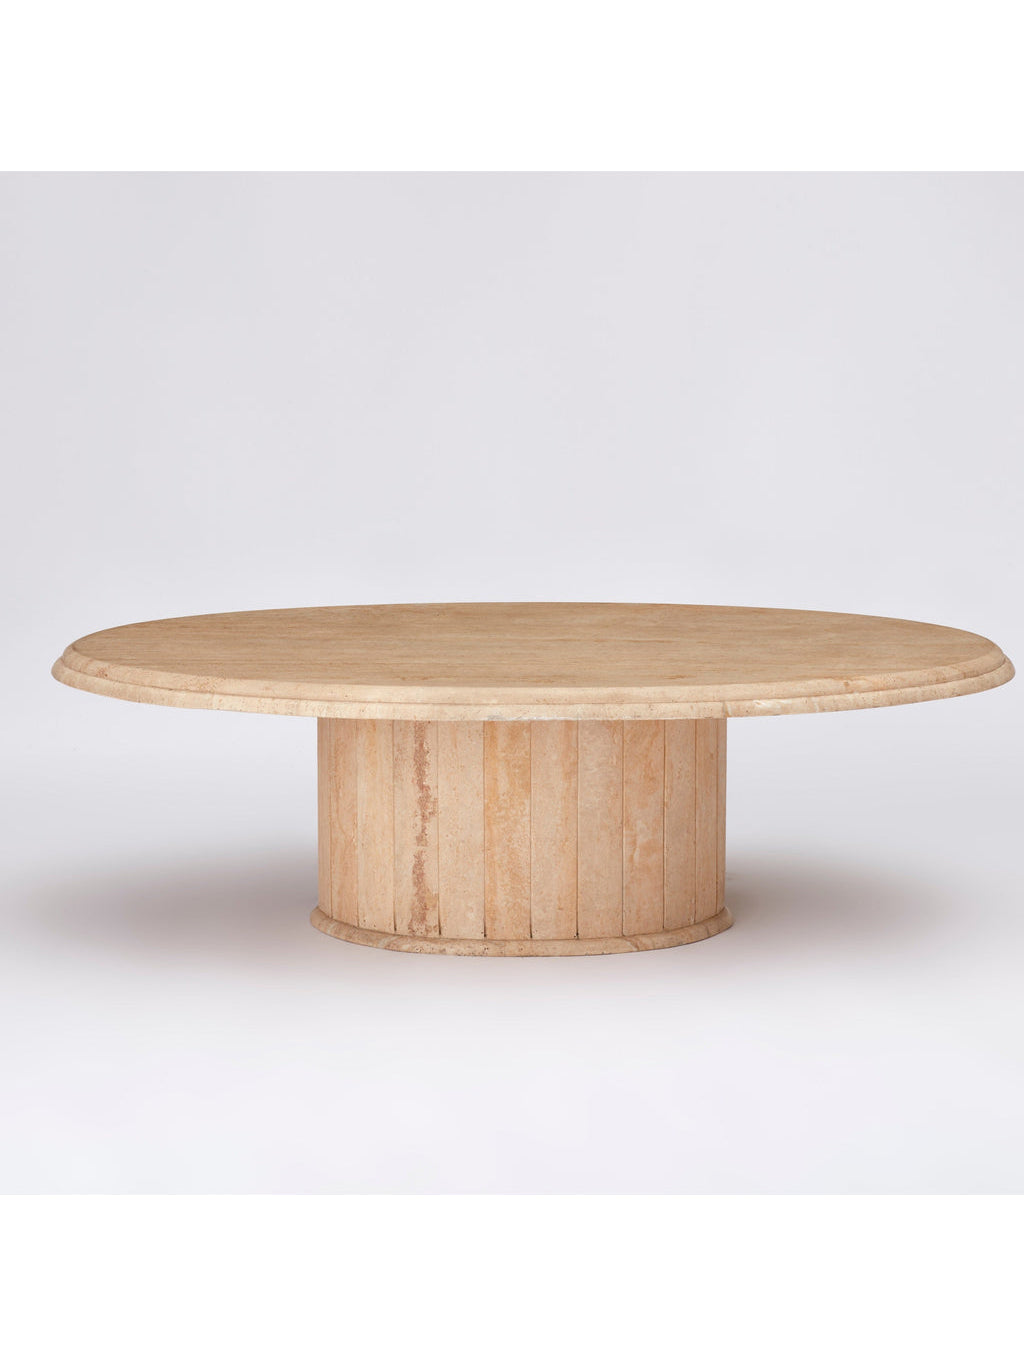 Soft Oval Travertine Coffee Table with Fluted Base Coffee Tables